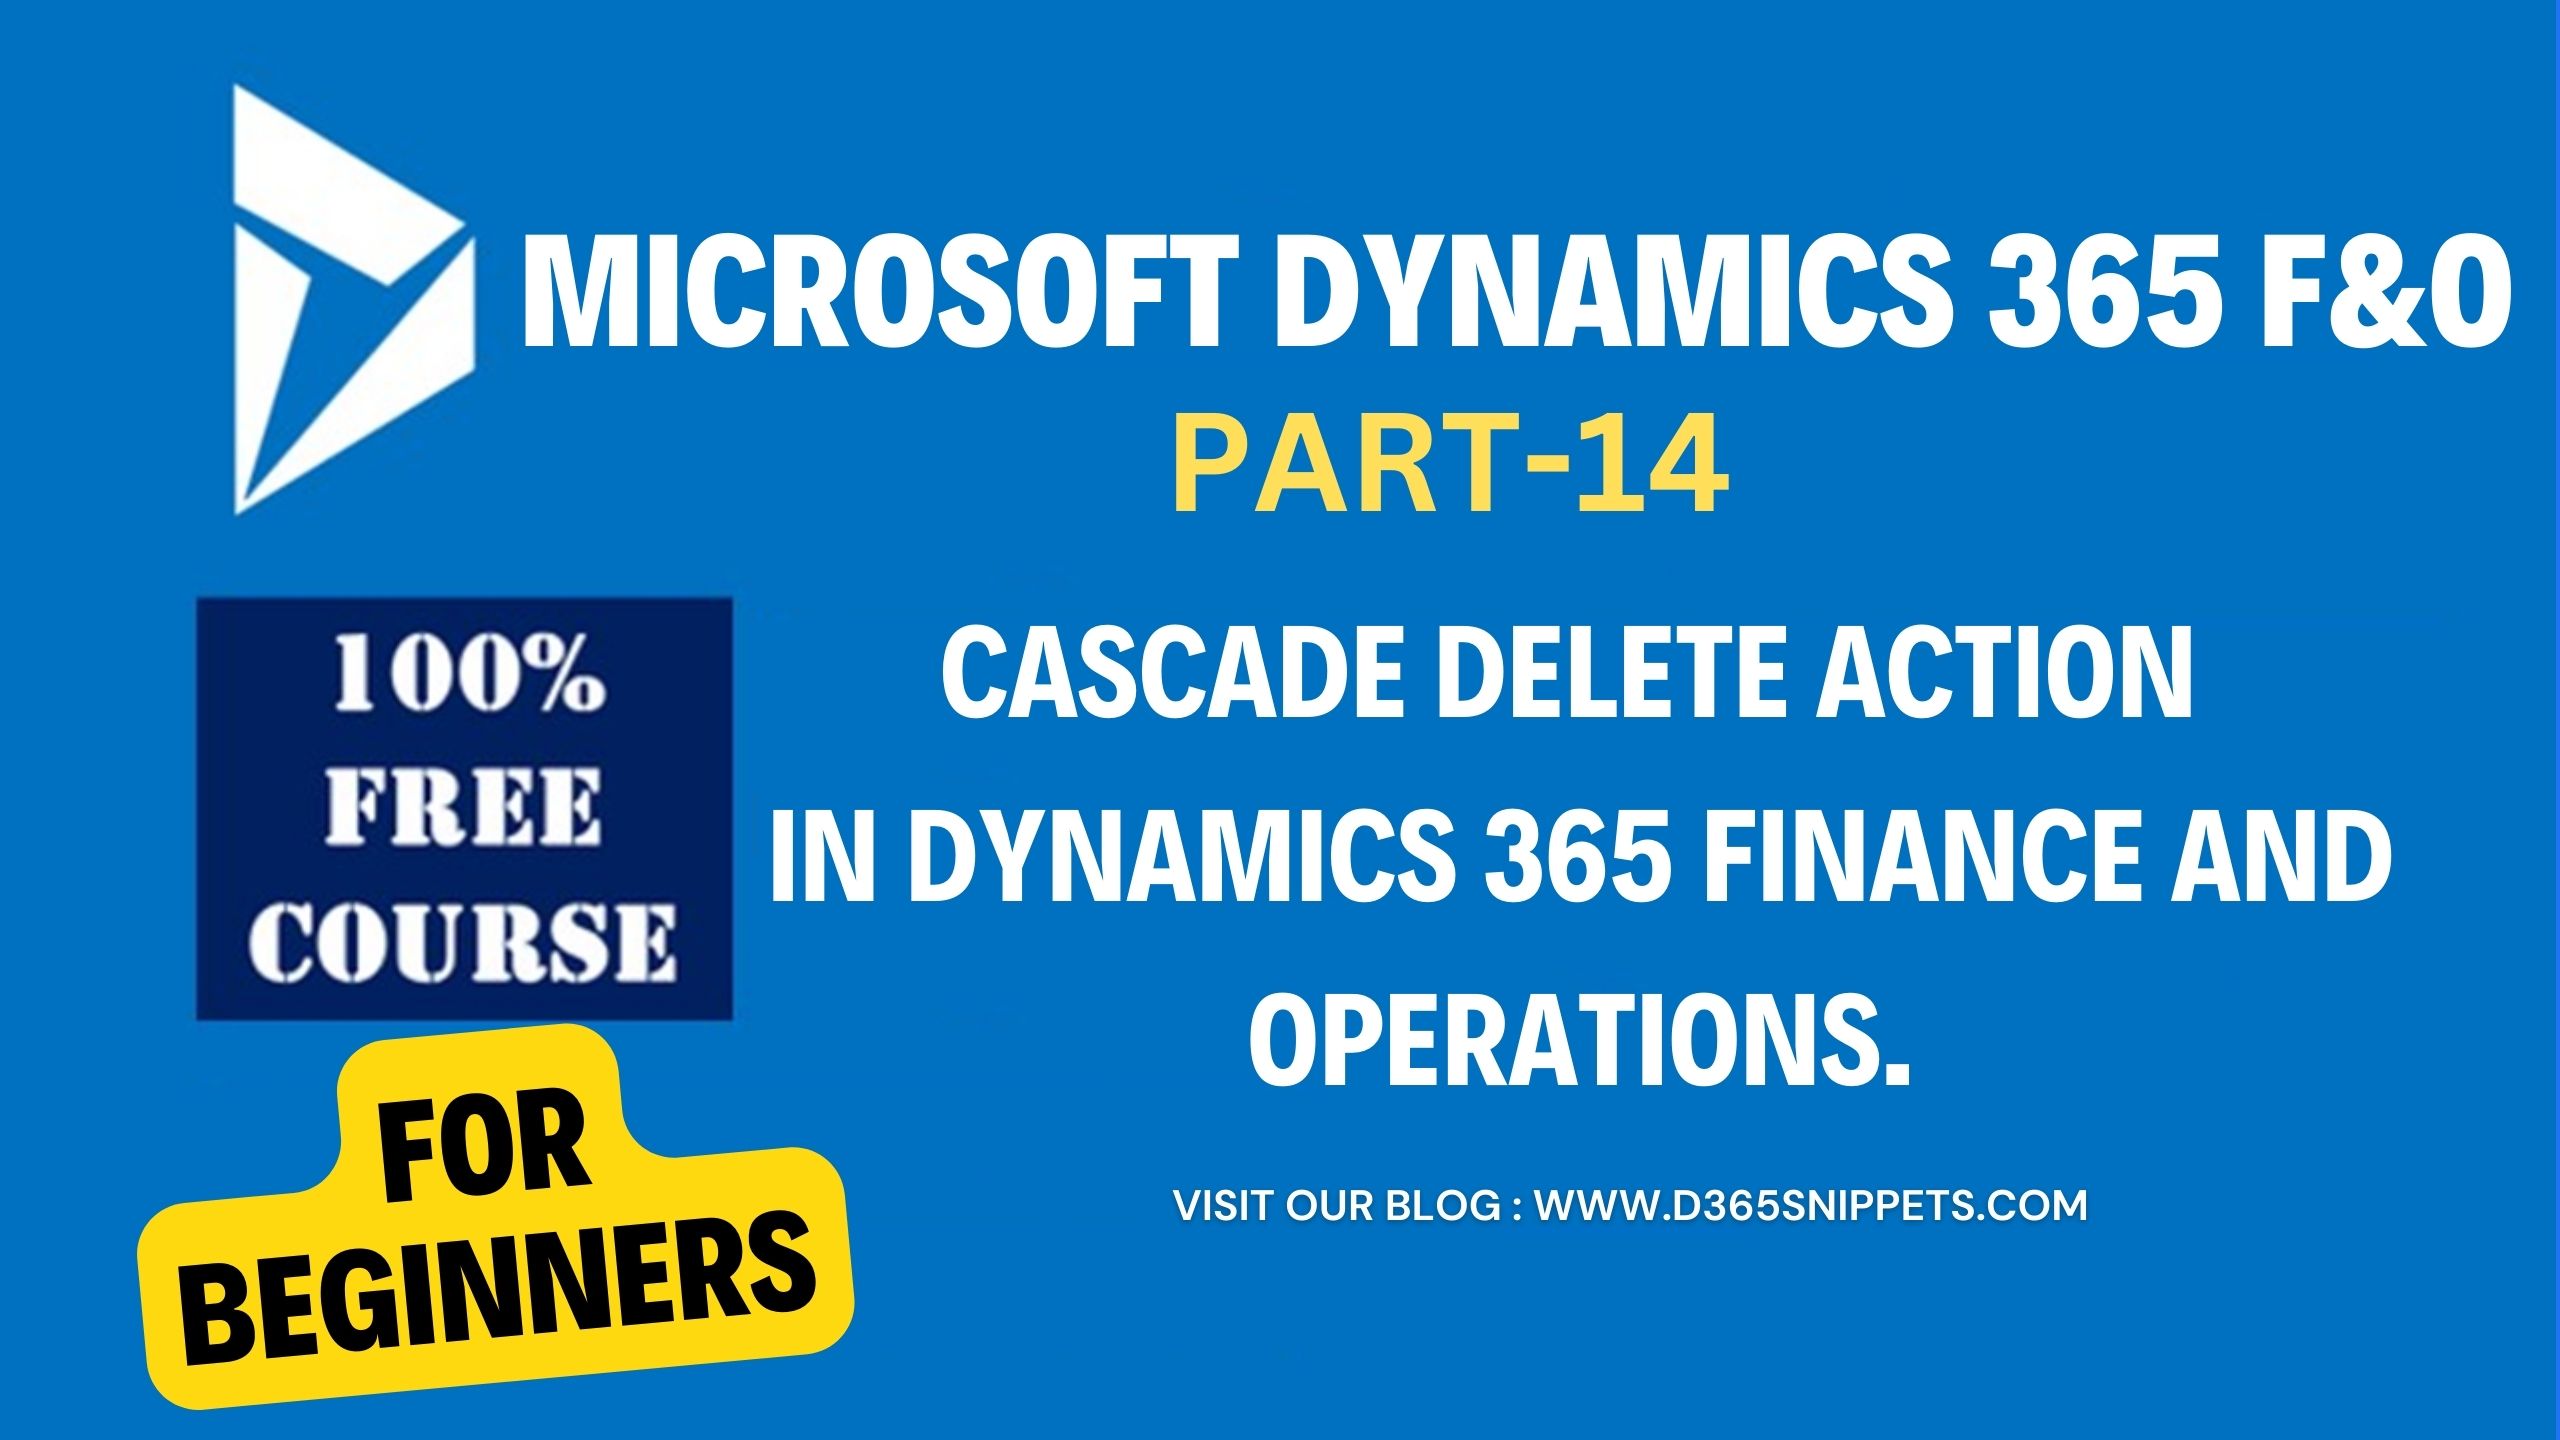 cascade delete action in dynamics 365 finance and operations